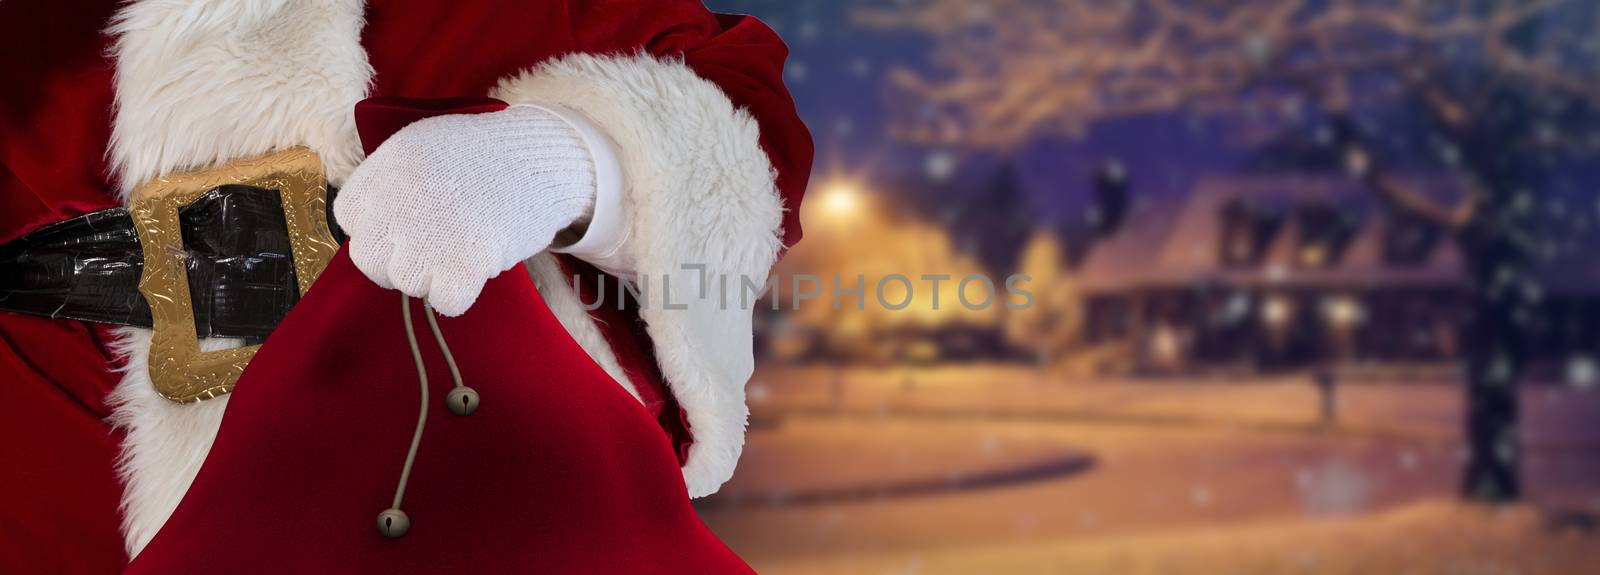 Santa claus holding his bag standing on the snow white streets with a house in the distance christmas background